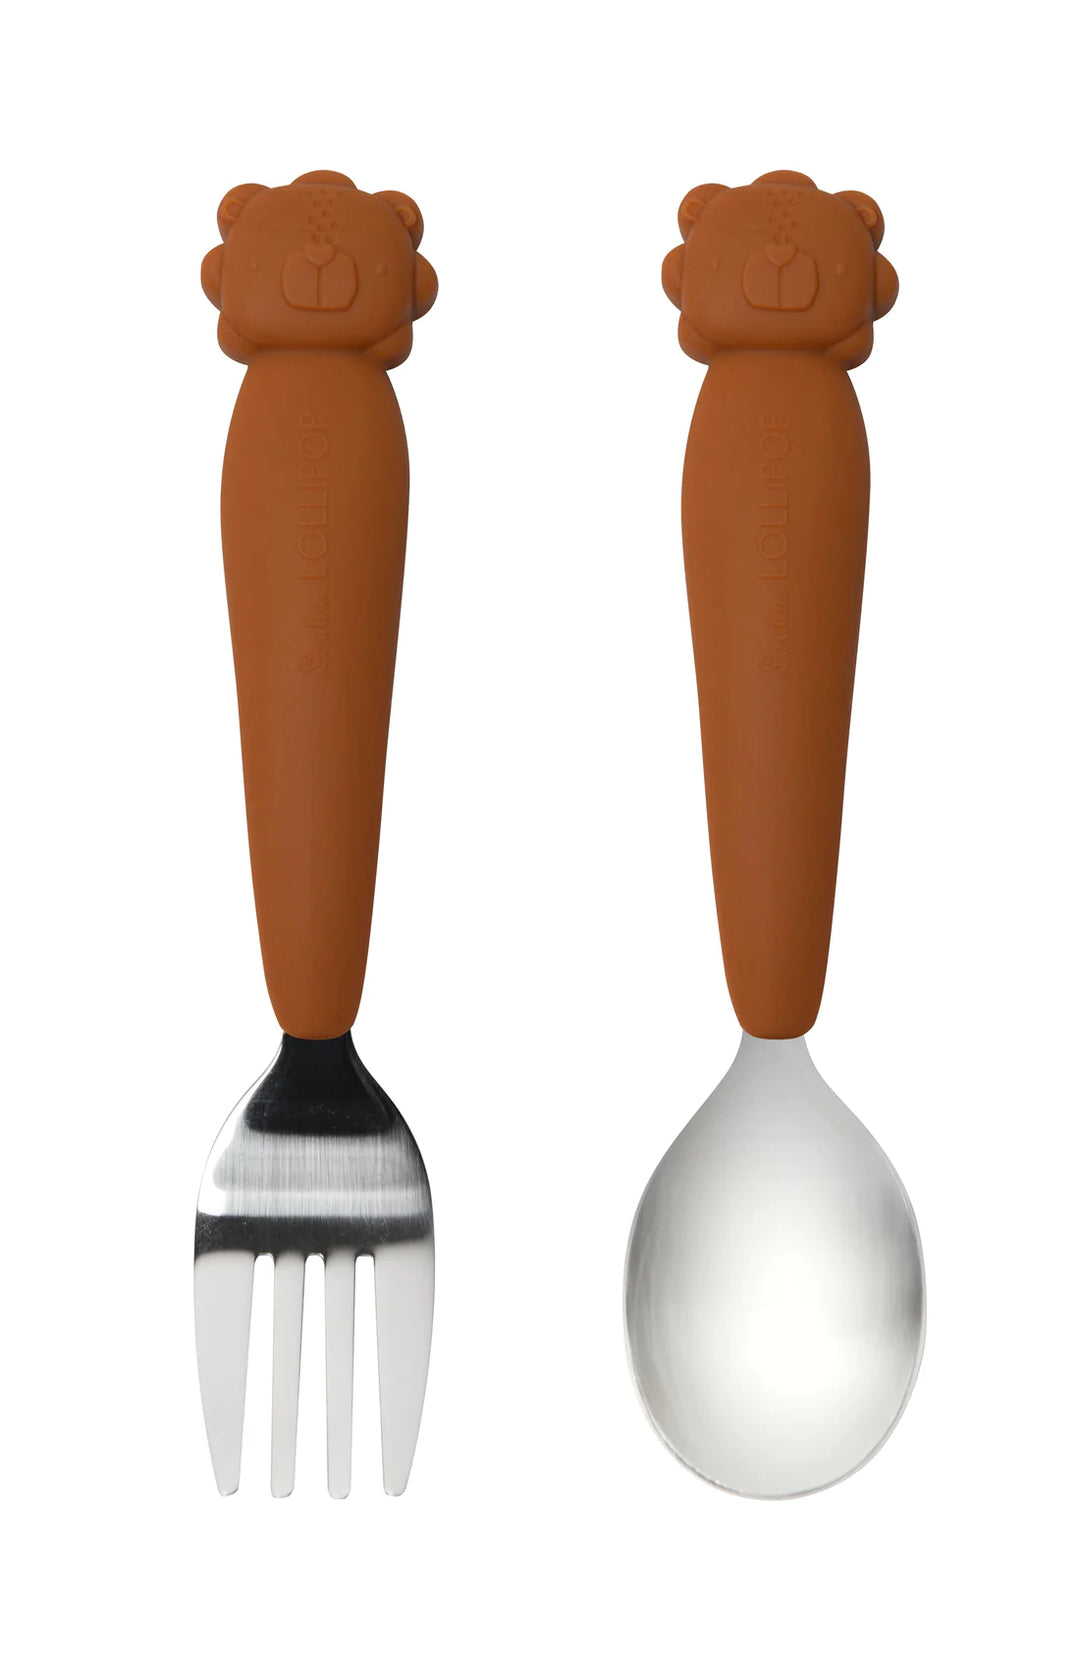 Lion Kids Spoon and Fork Set by Loulou Lollipop